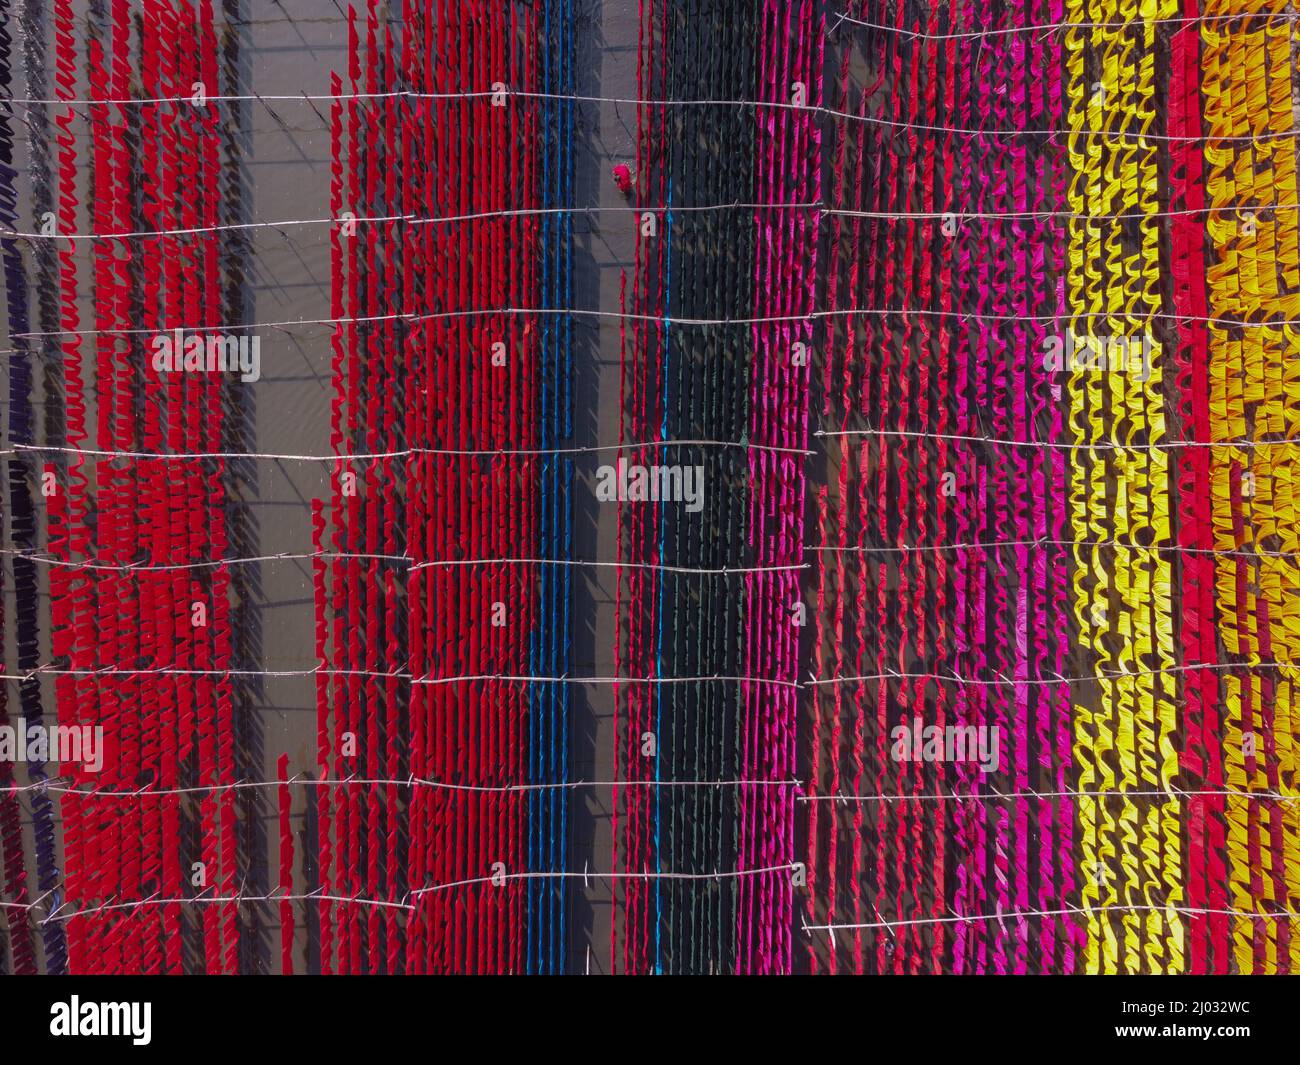 Narayanganj, Dhaka, Bangladesh. 16th Mar, 2022. Workers hang thousands of different colorful fabrics on iron wires tied between a bamboo framework and constantly turn them so that they dry perfectly in flooded field in Narayanganj, Bangladesh. Iron wires are used between a bamboo framework to create giant washing lines for the final part of the dying process as the fabrics are dried in the sun. Bright strands of blue, pink, orange and green-dyed cloths hang above the grassy field in a dazzling network of interlocking colors. This is the final part of the dying process after which the cloth is Stock Photo